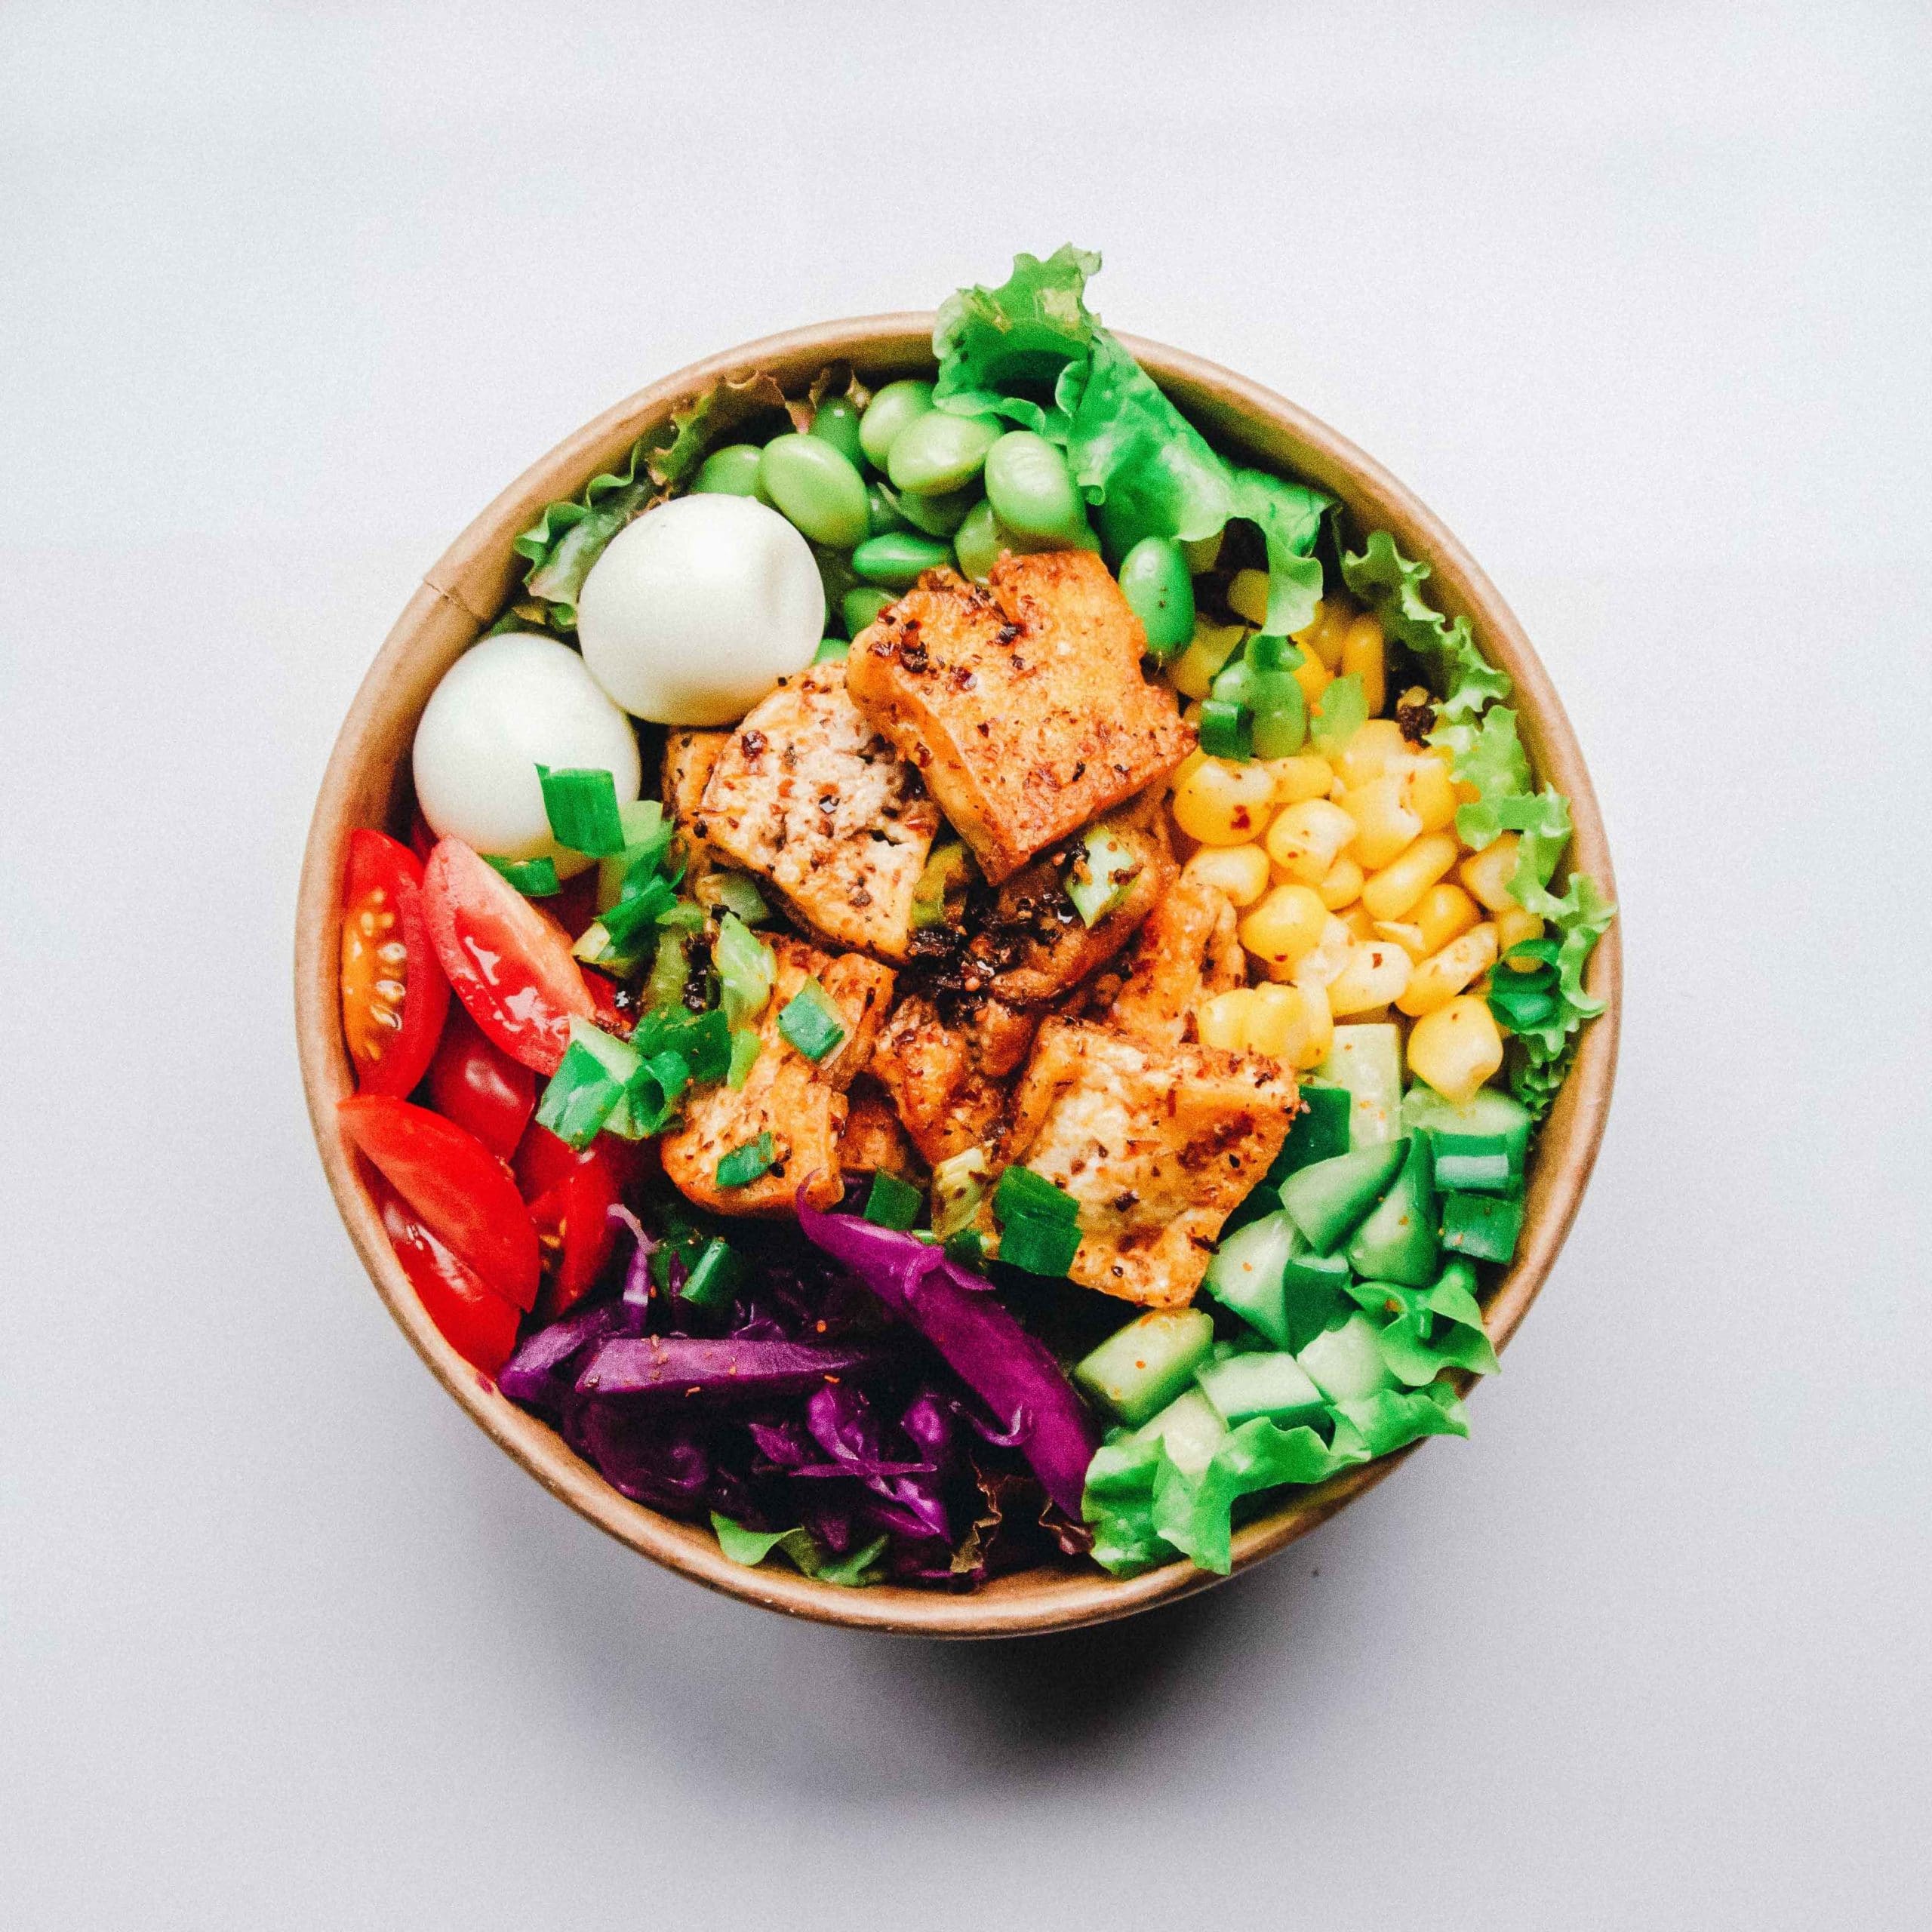 Healthy salad bowl topped with grilled chicken